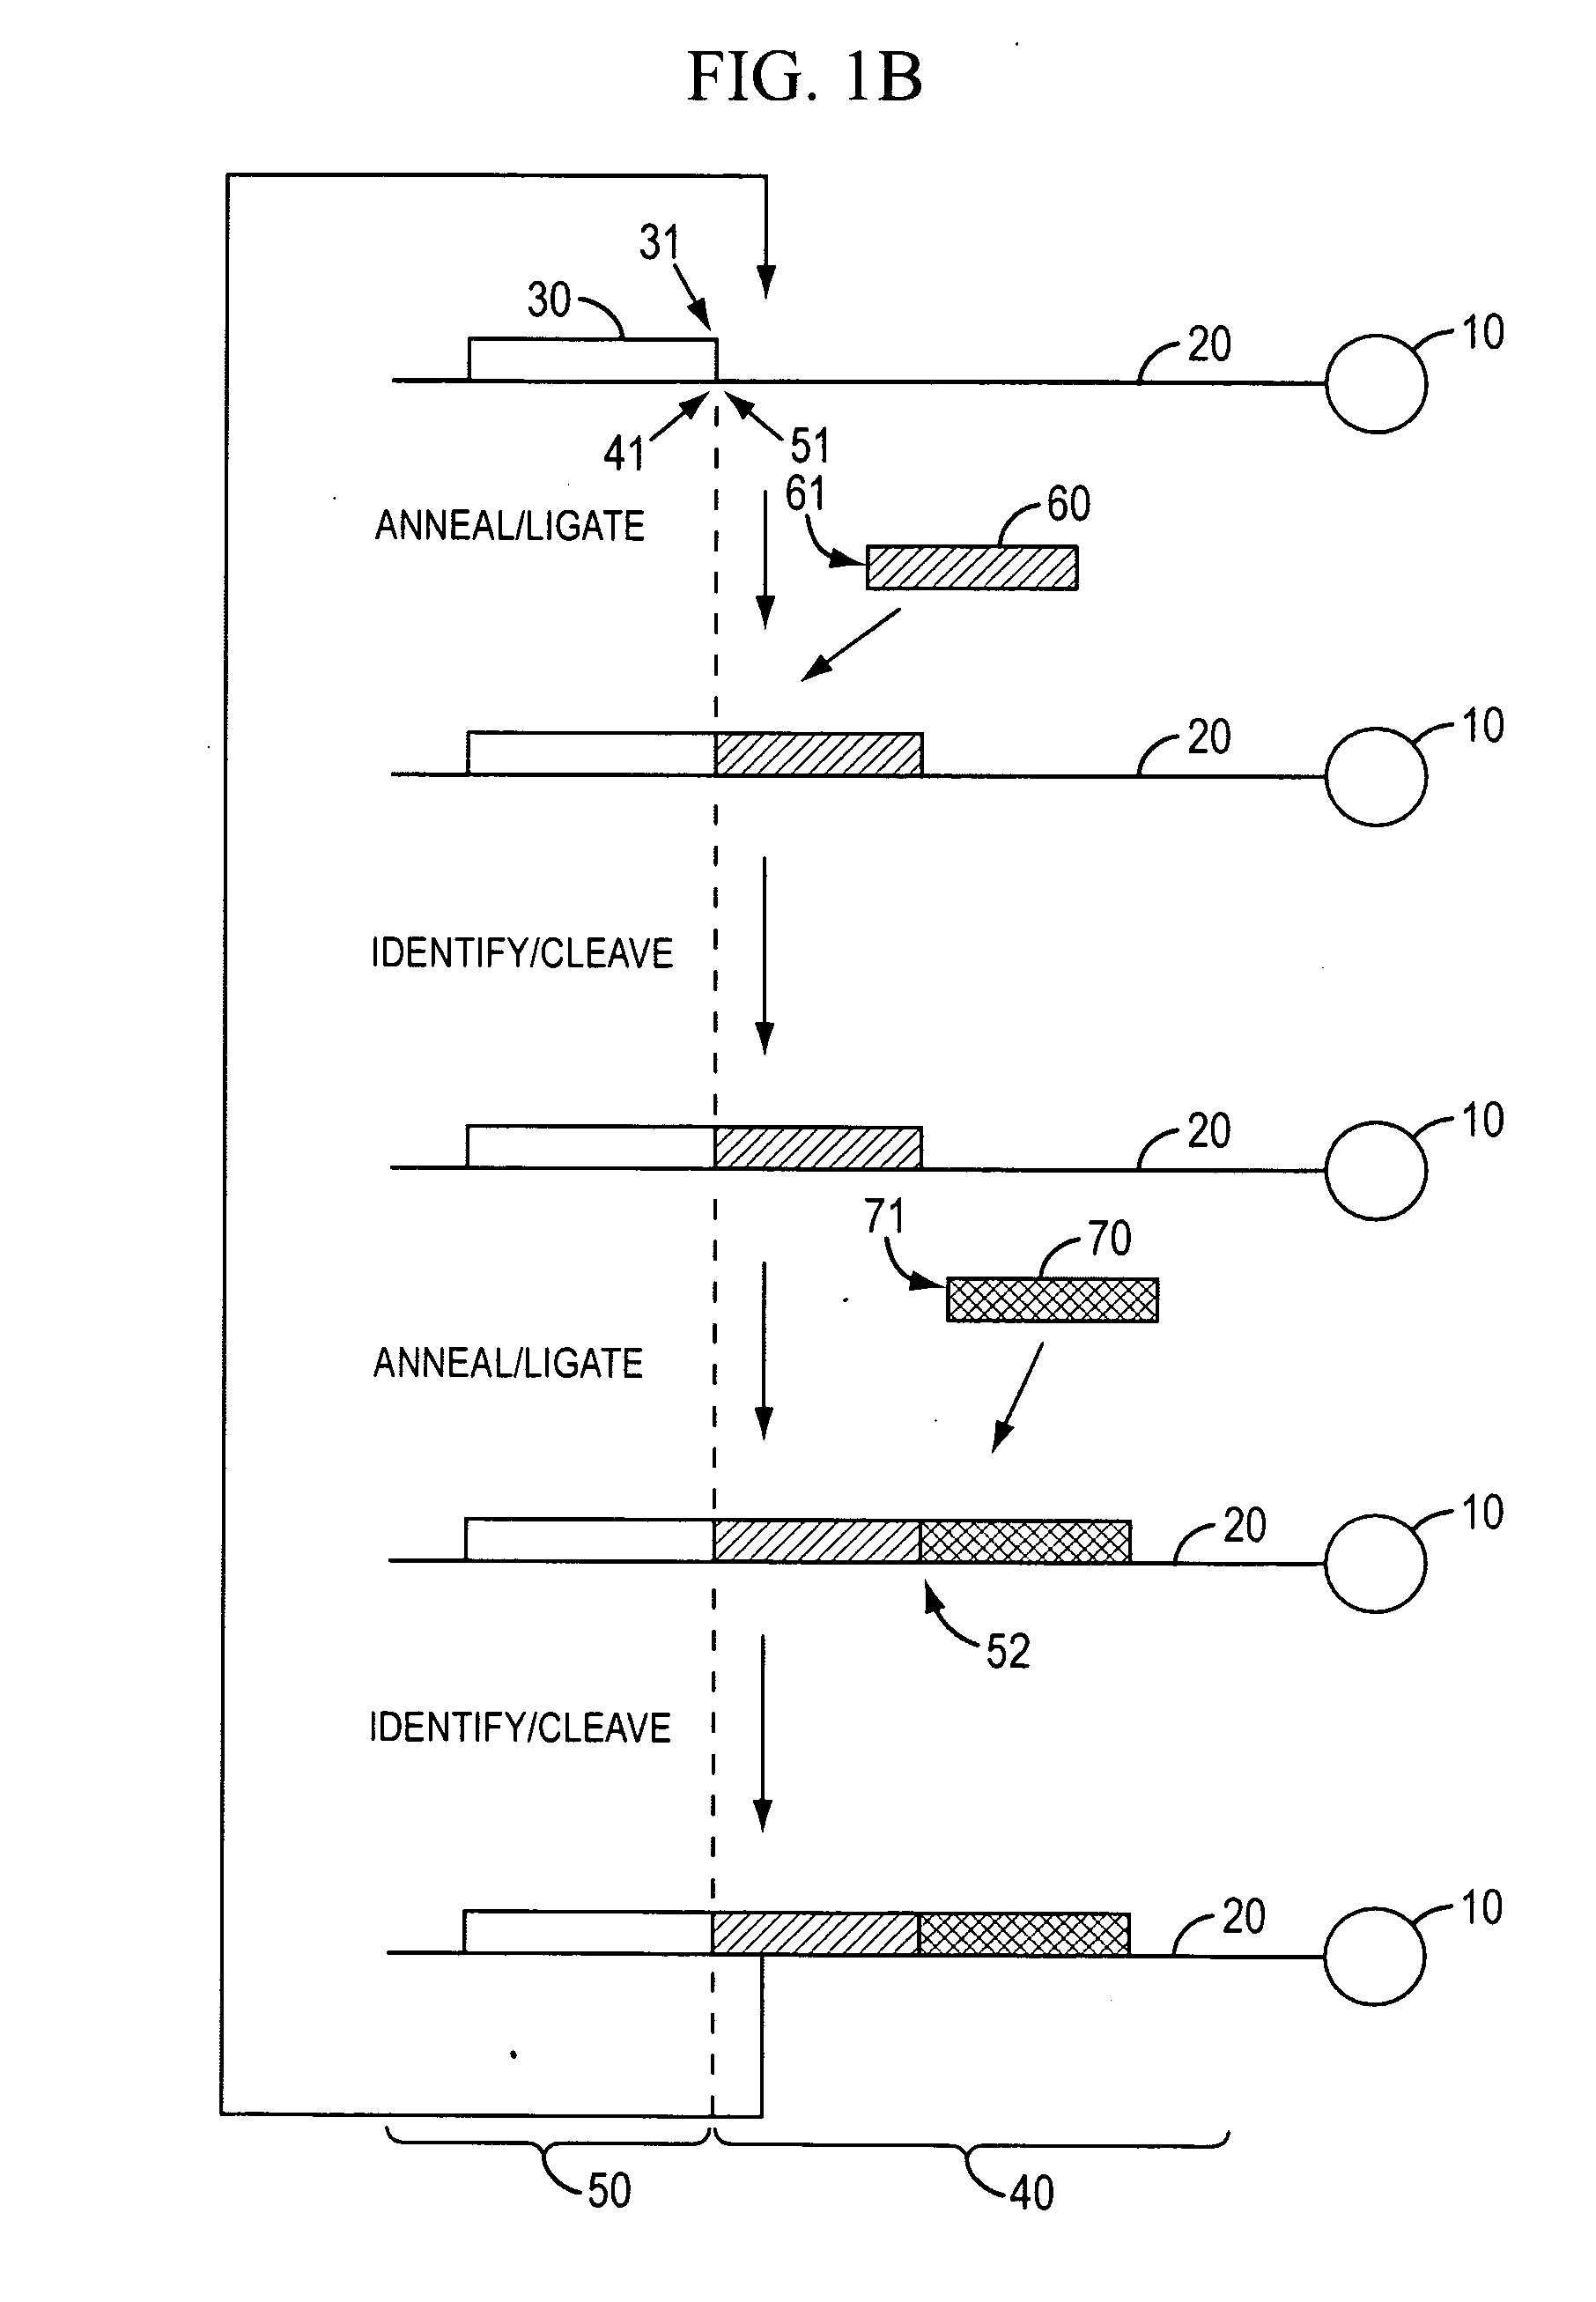 Reagents, methods, and libraries for bead-based sequencing